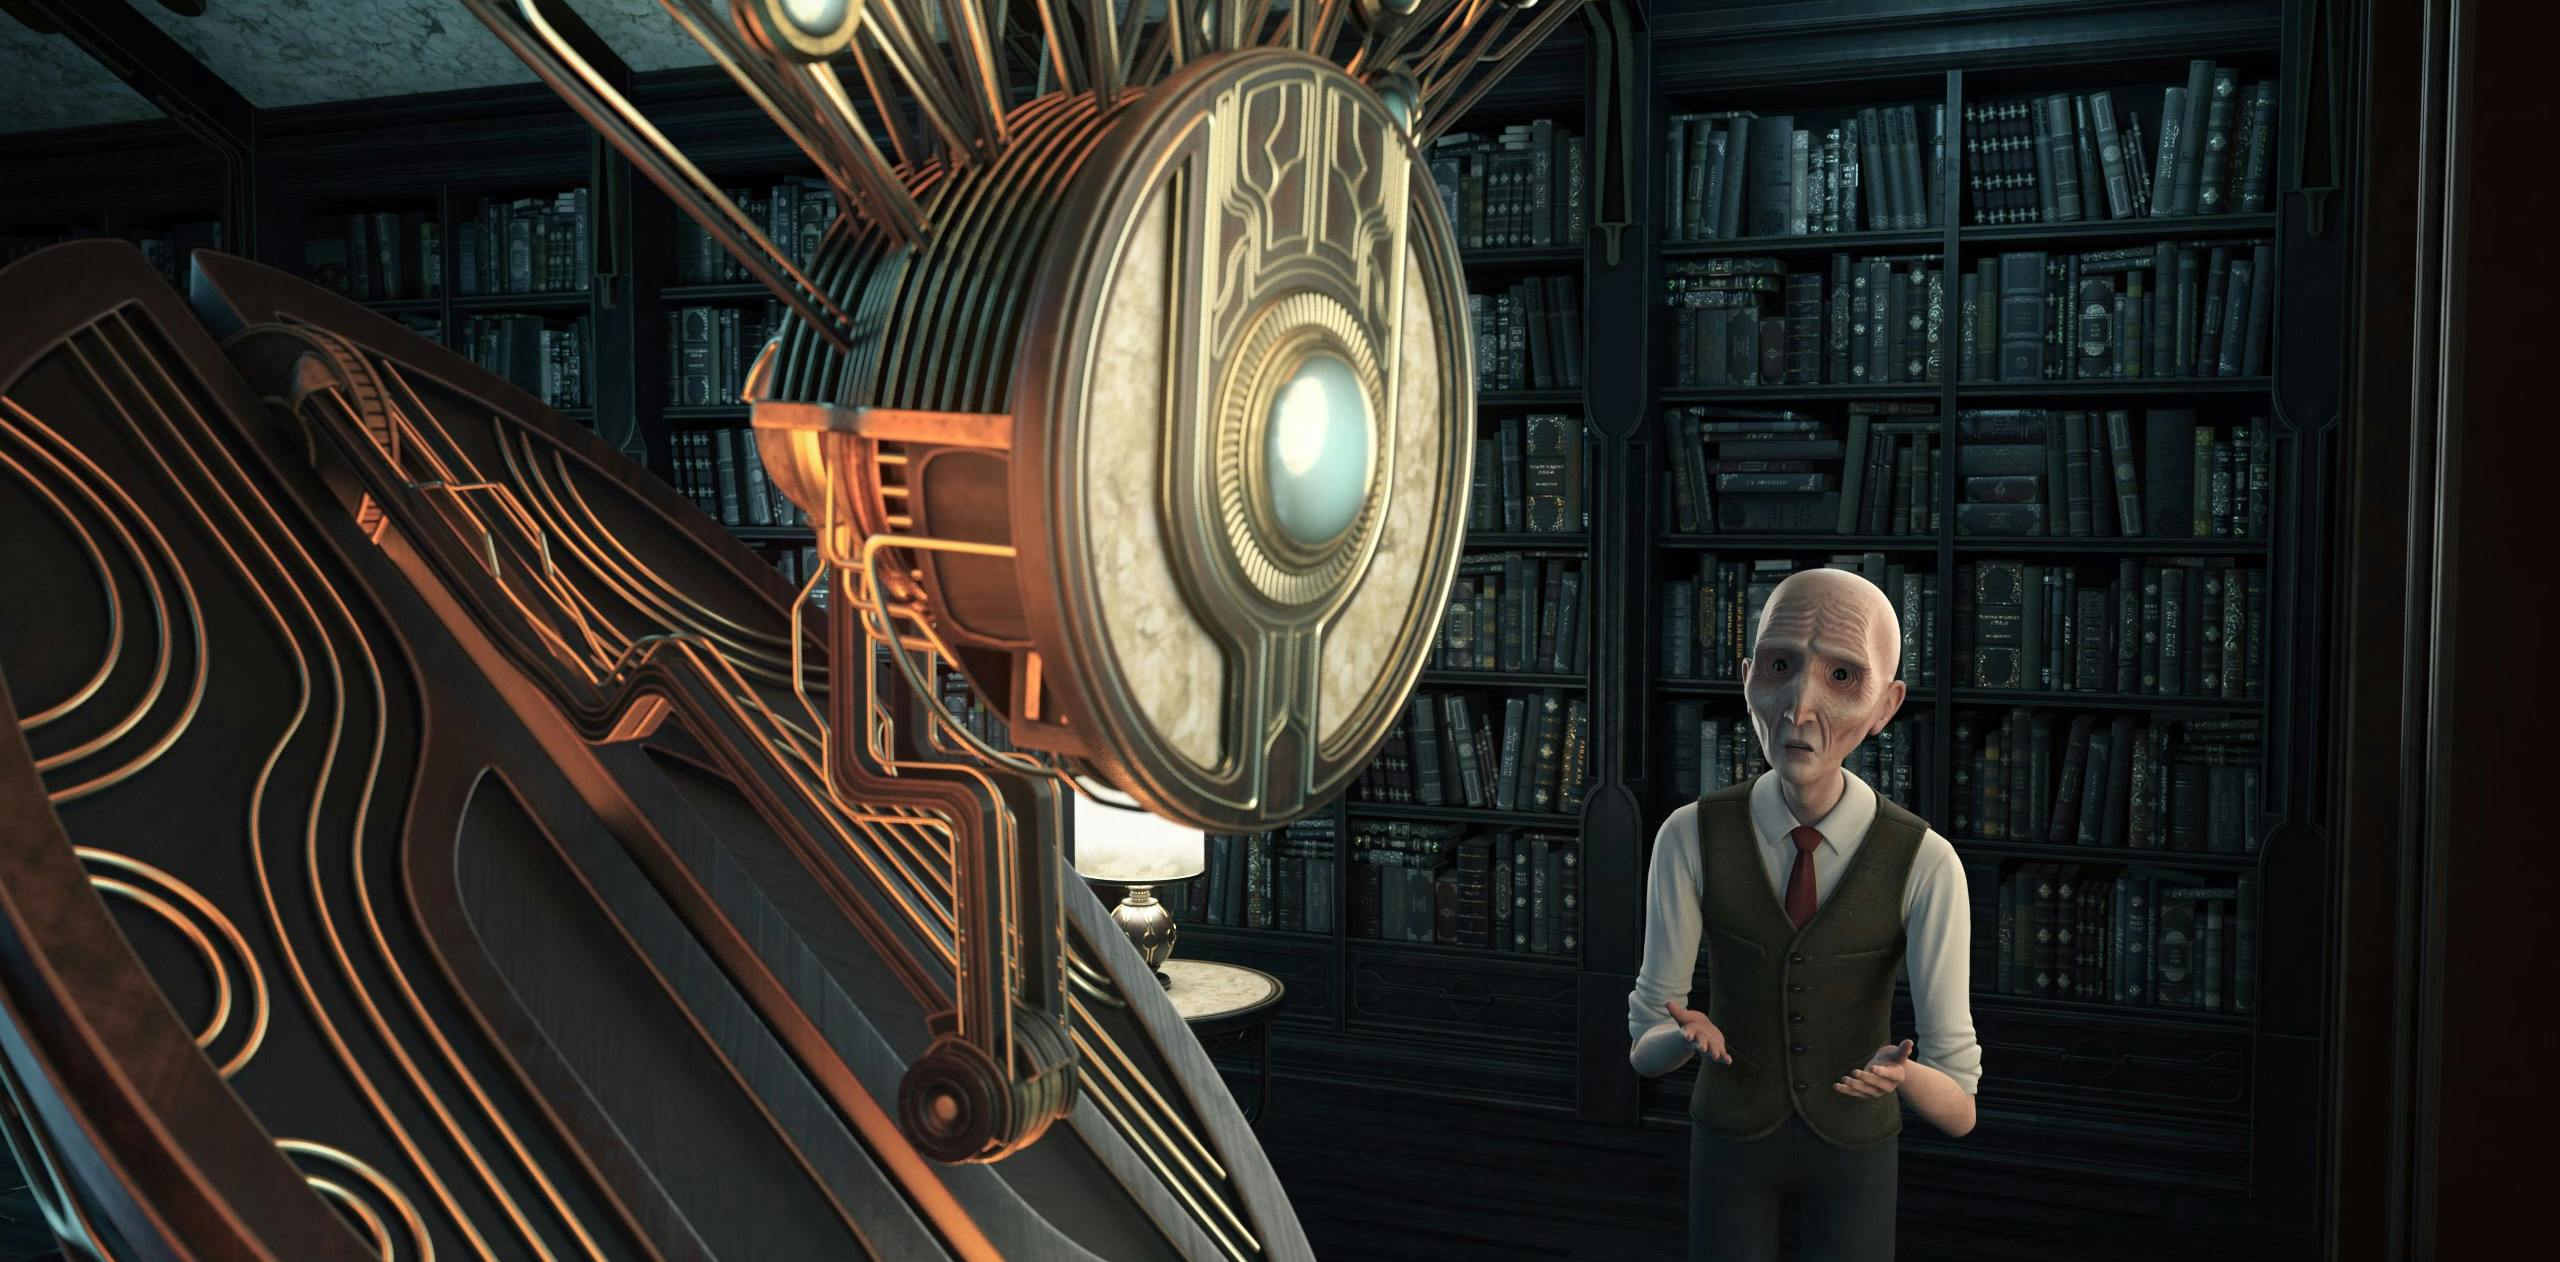 On old man in a white shirt, green vest and red tie speaks to an ornate, single-eyed robot. Behind them there is a wall of bookshelves densely packed with beautiful hard-backed books.